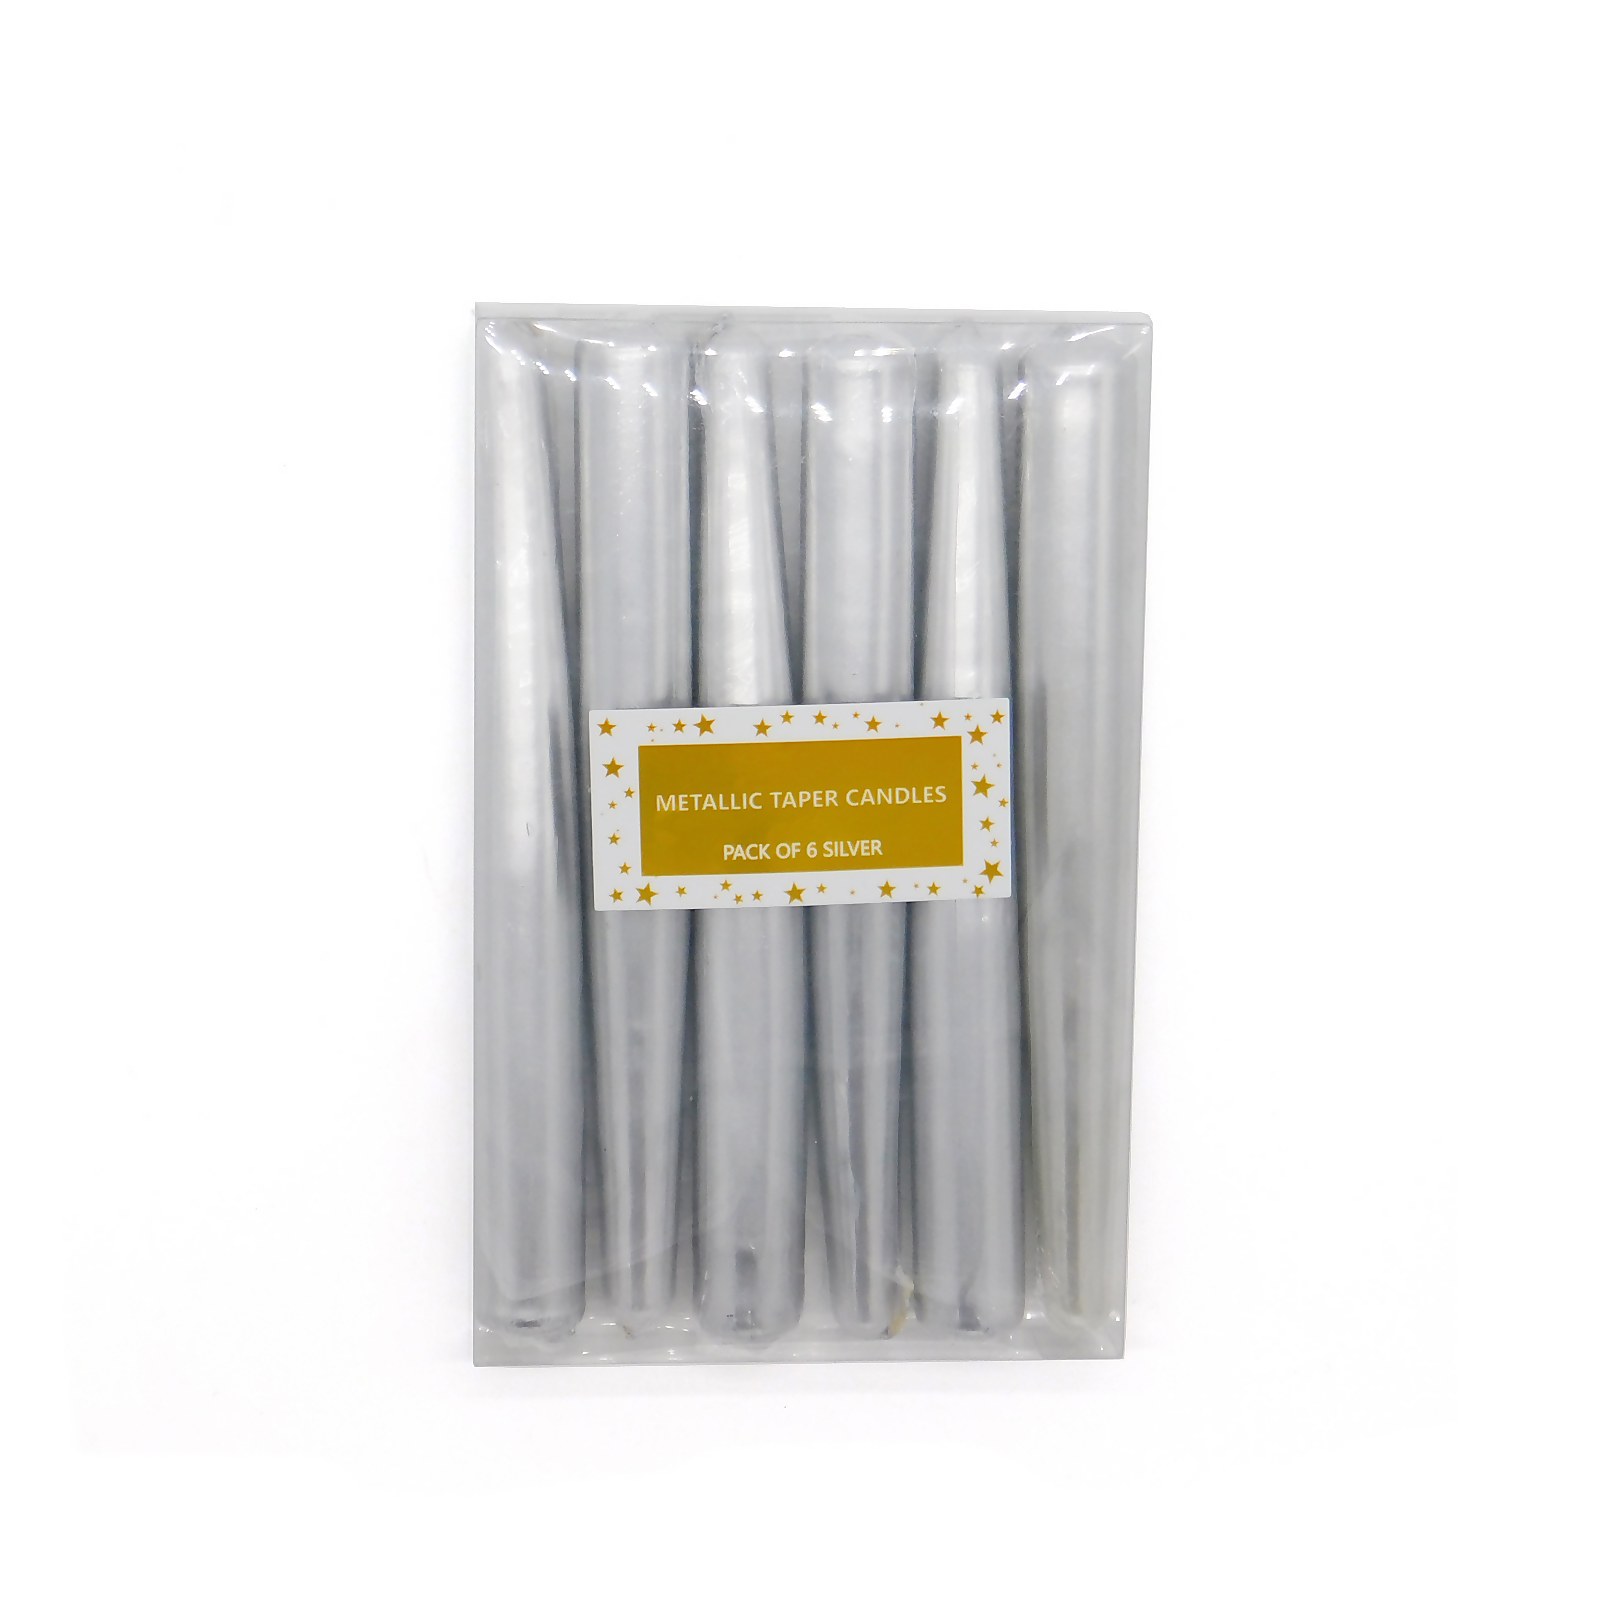 Photo of Silver Metallic Taper Candles - 6 Pack